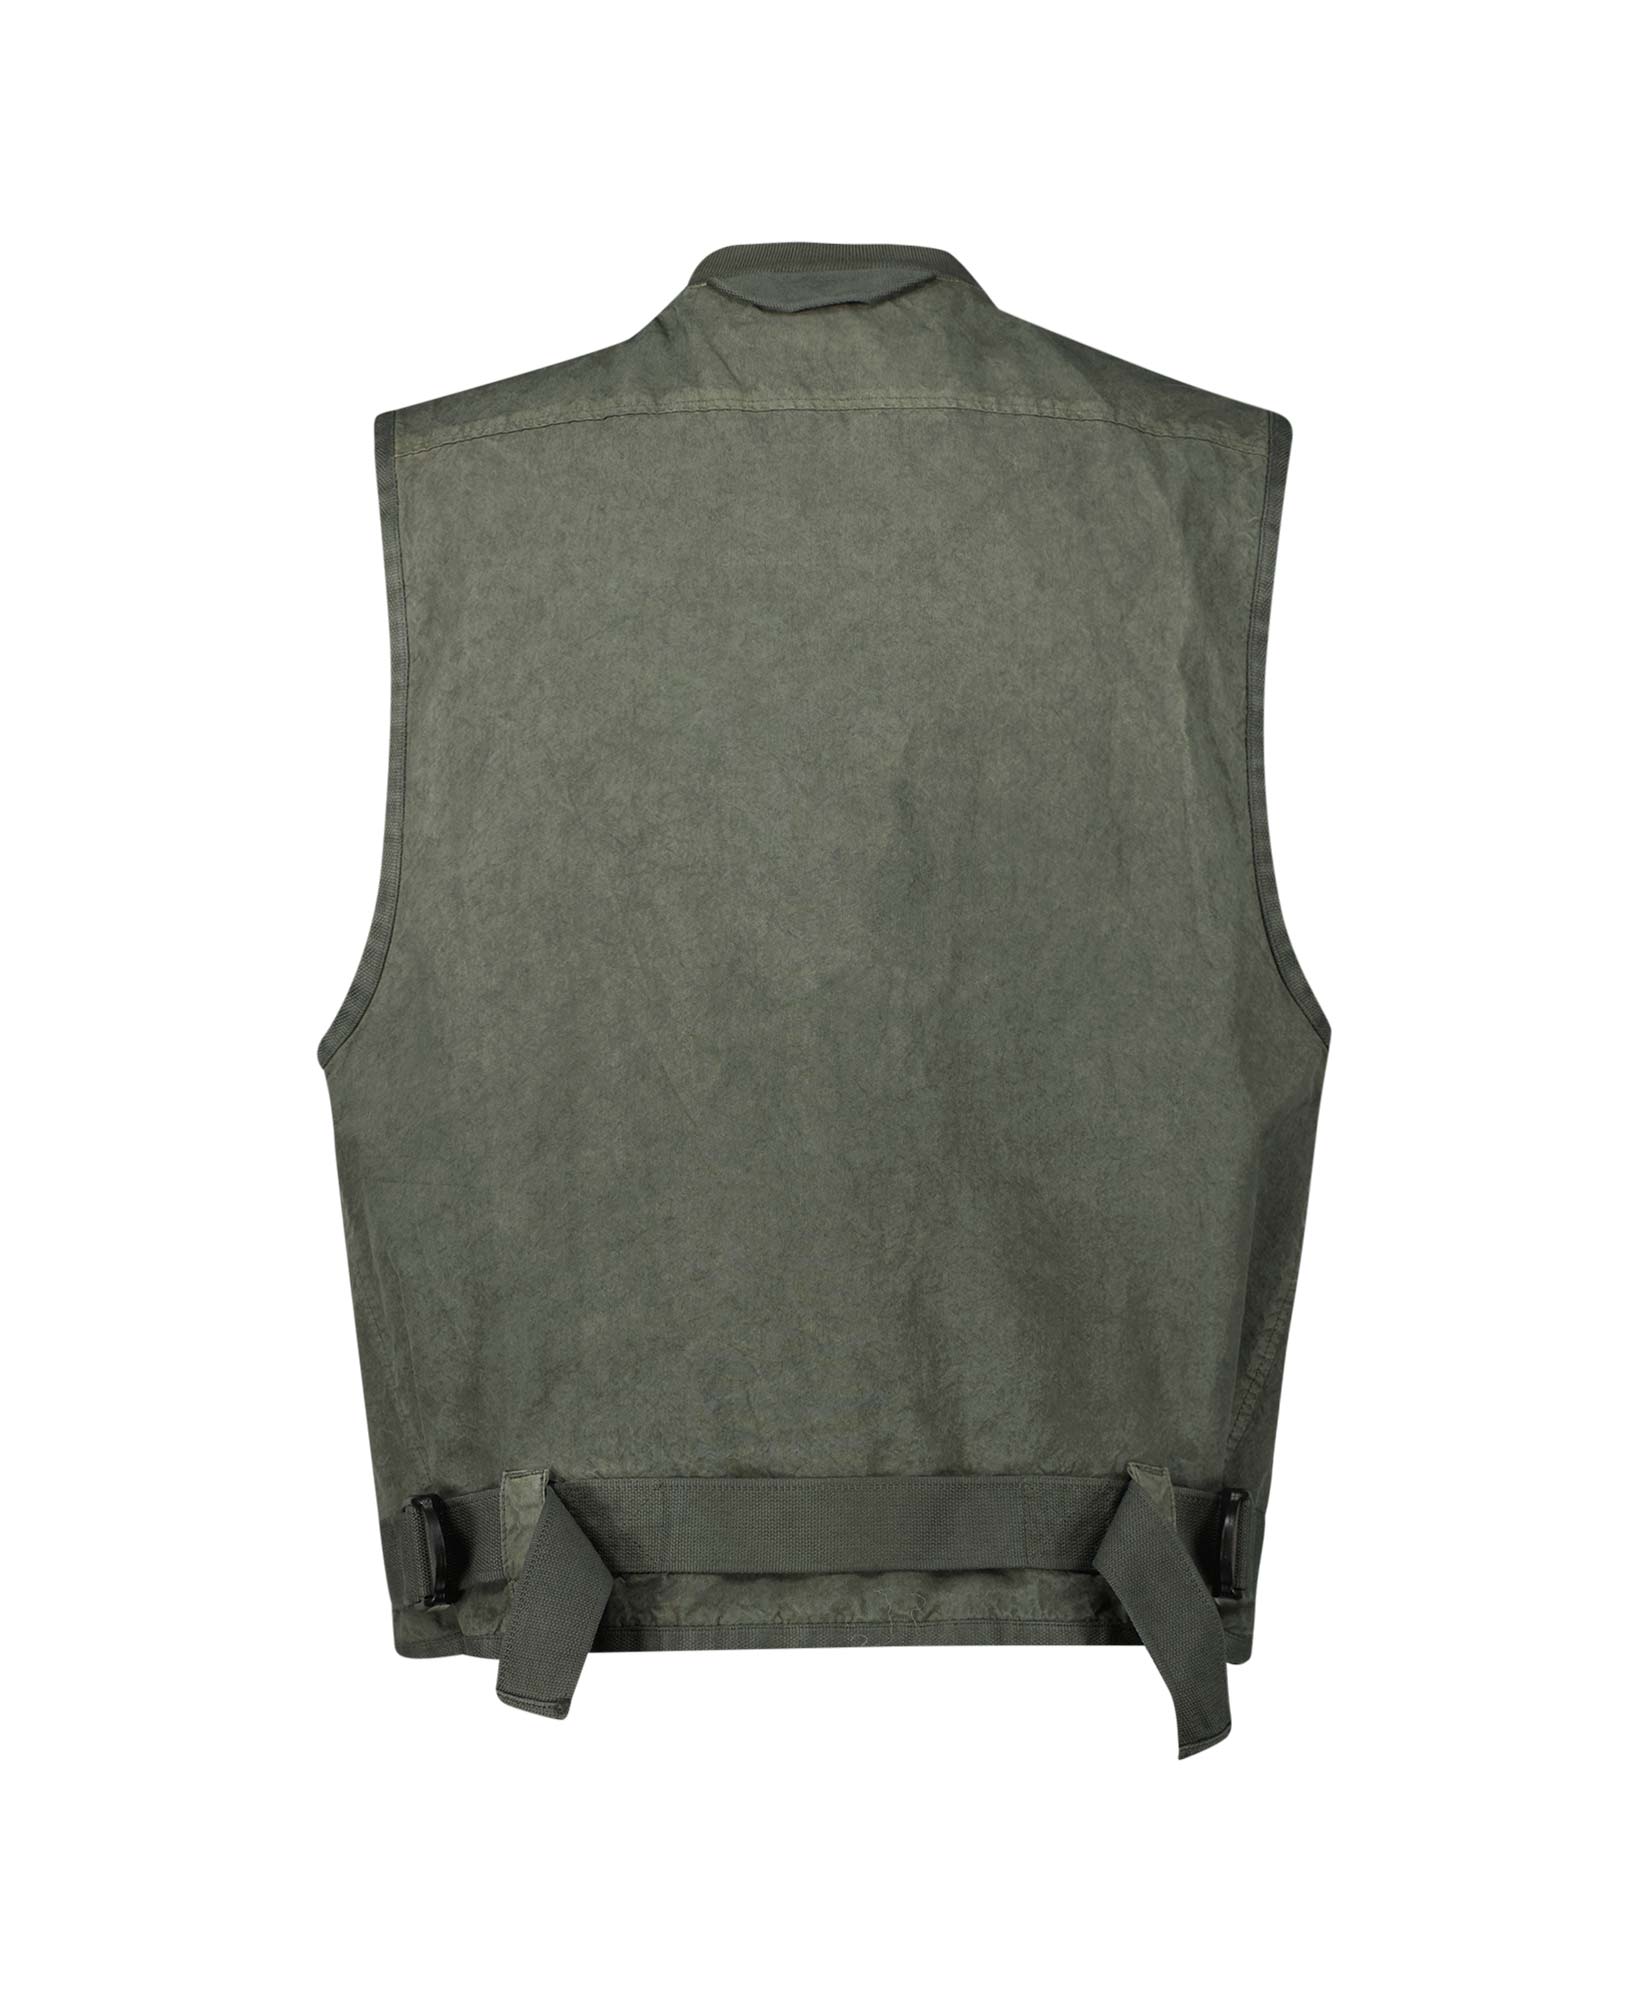 Cp Company Gilet 13cmow255a-006237 Donker Groen